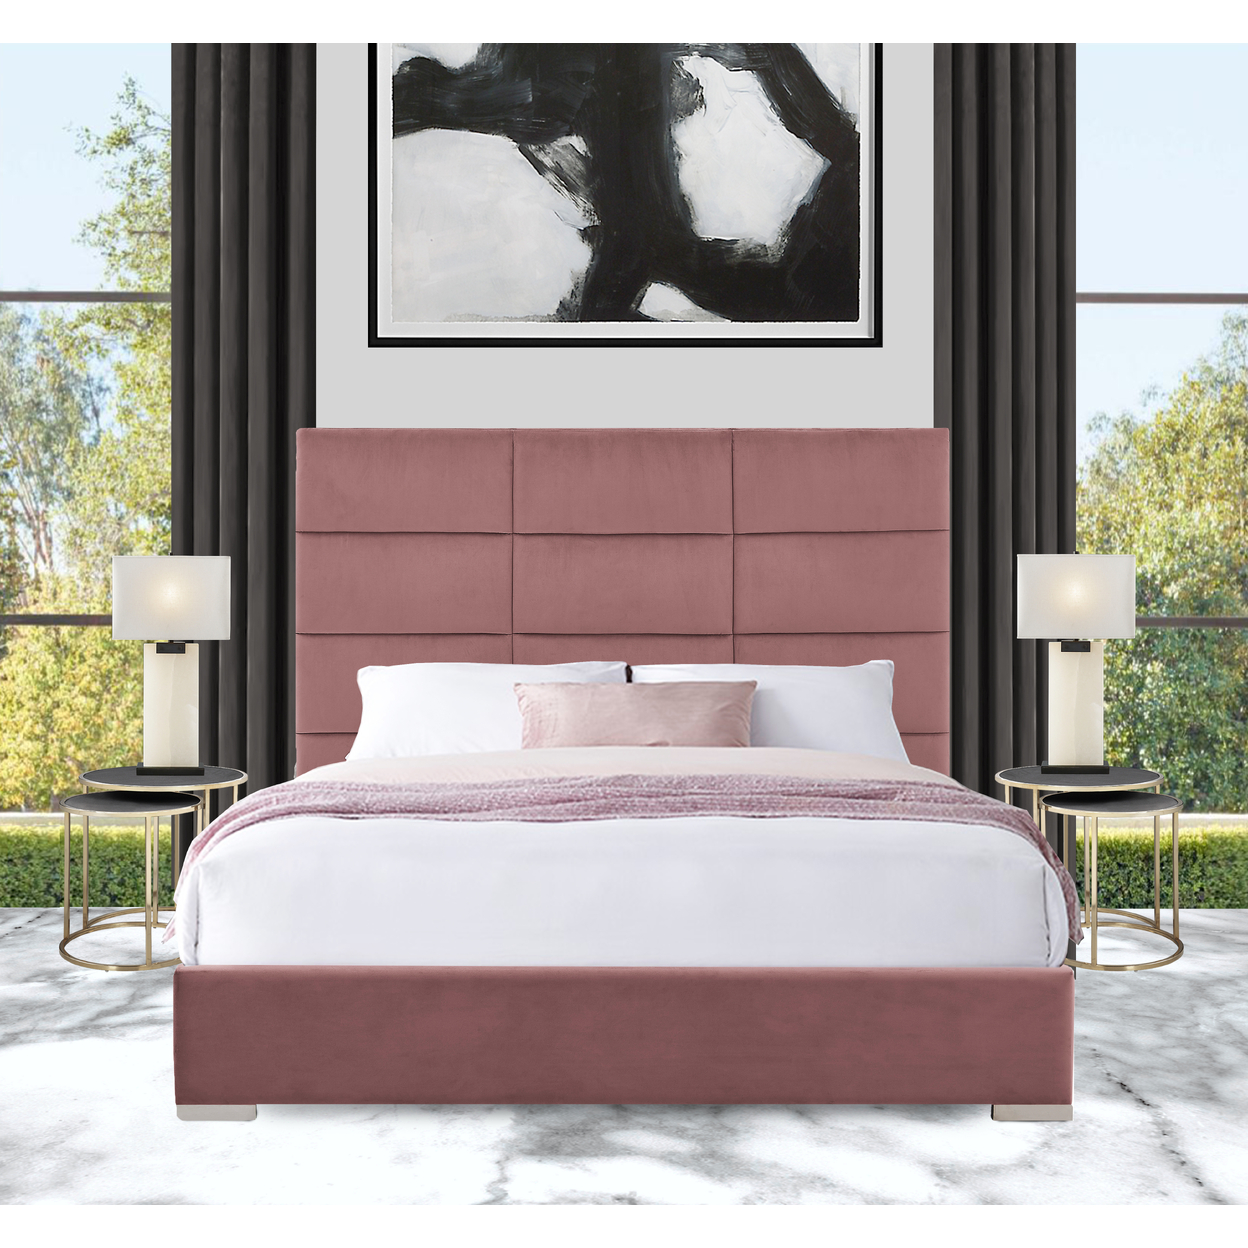 Iconic Home Durazzo Storage Platform Bed Frame With Headboard Velvet Upholstered Box Quilted, Modern Contemporary - Dark Blush, King